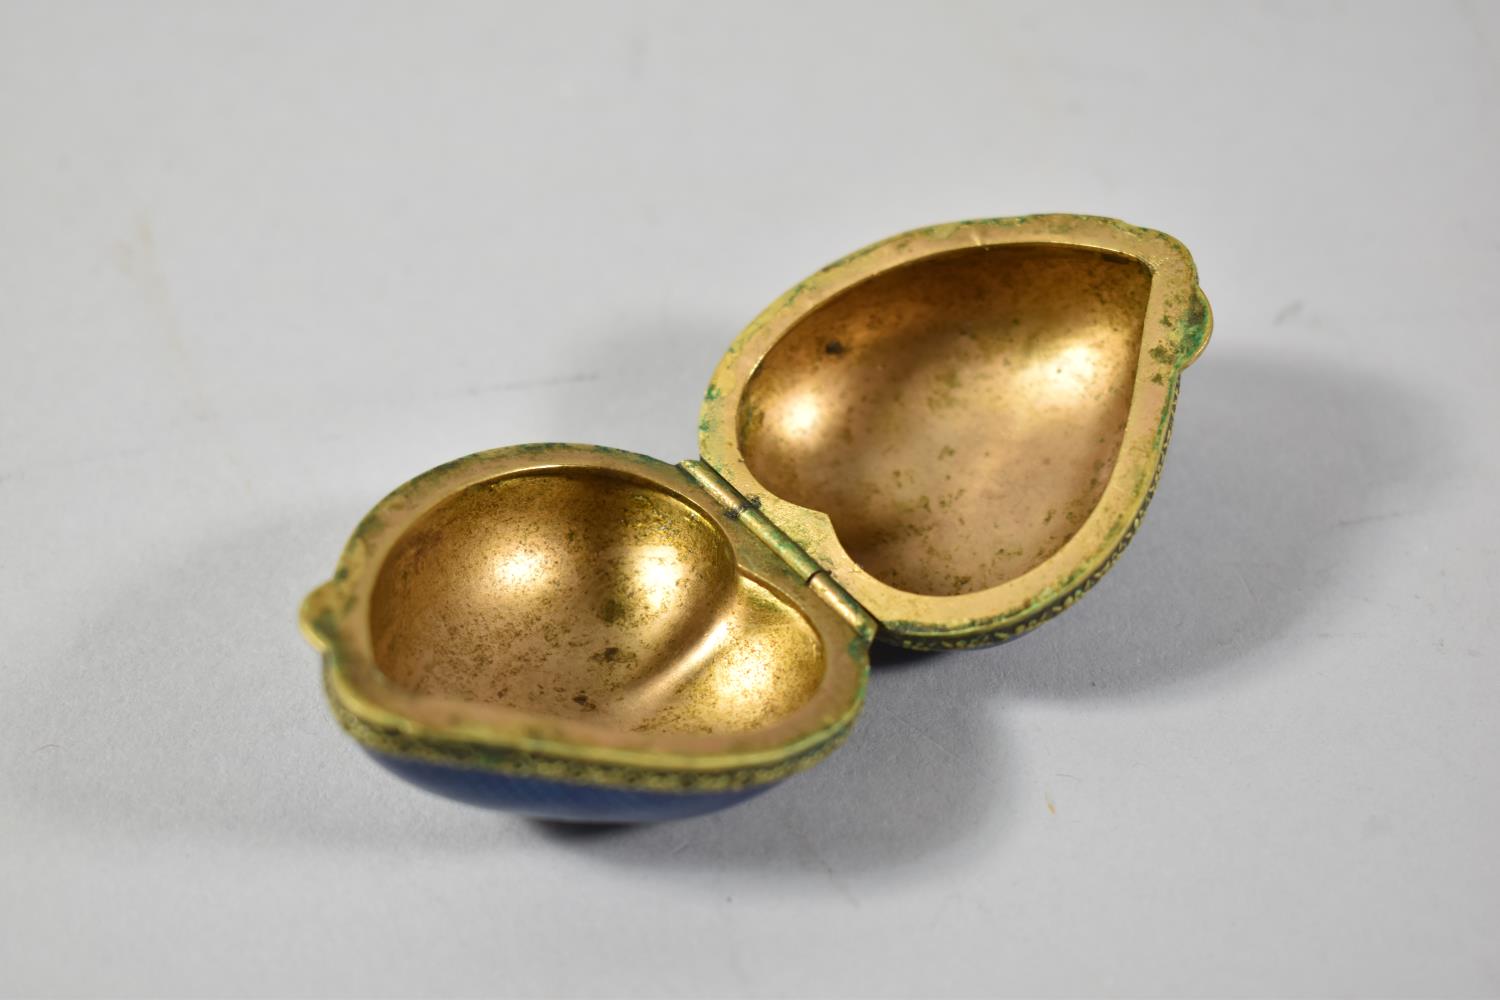 A Small Blue Enamelled Gilt Metal Box in the Form of a Heart, 4.25cm high - Image 3 of 3